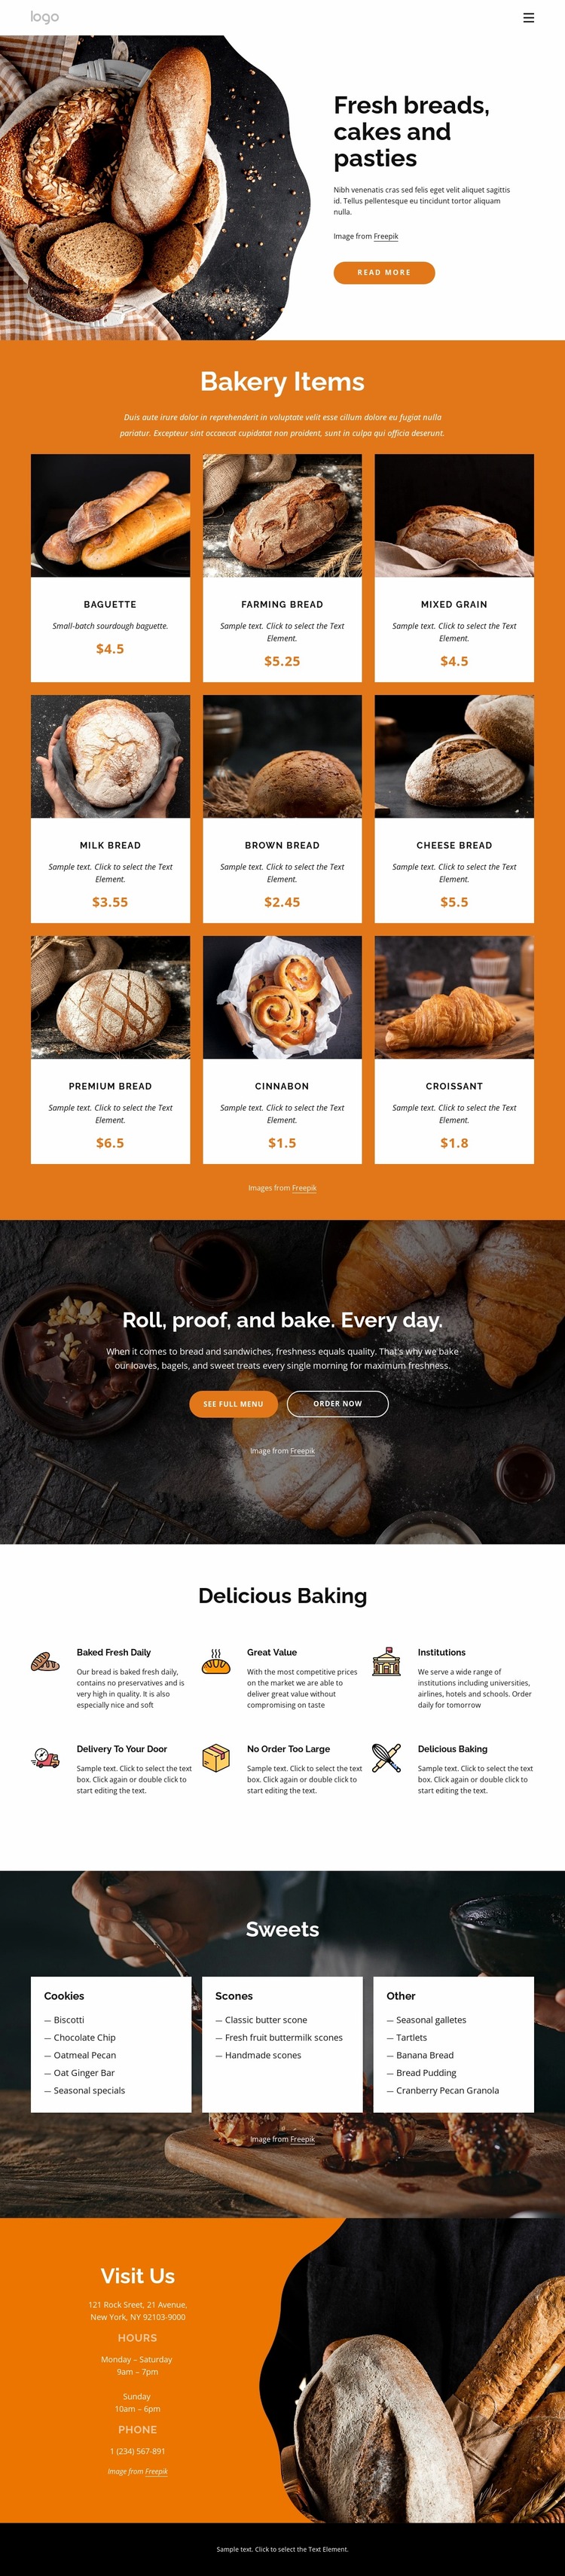 Fresh breads and cakes Website Mockup